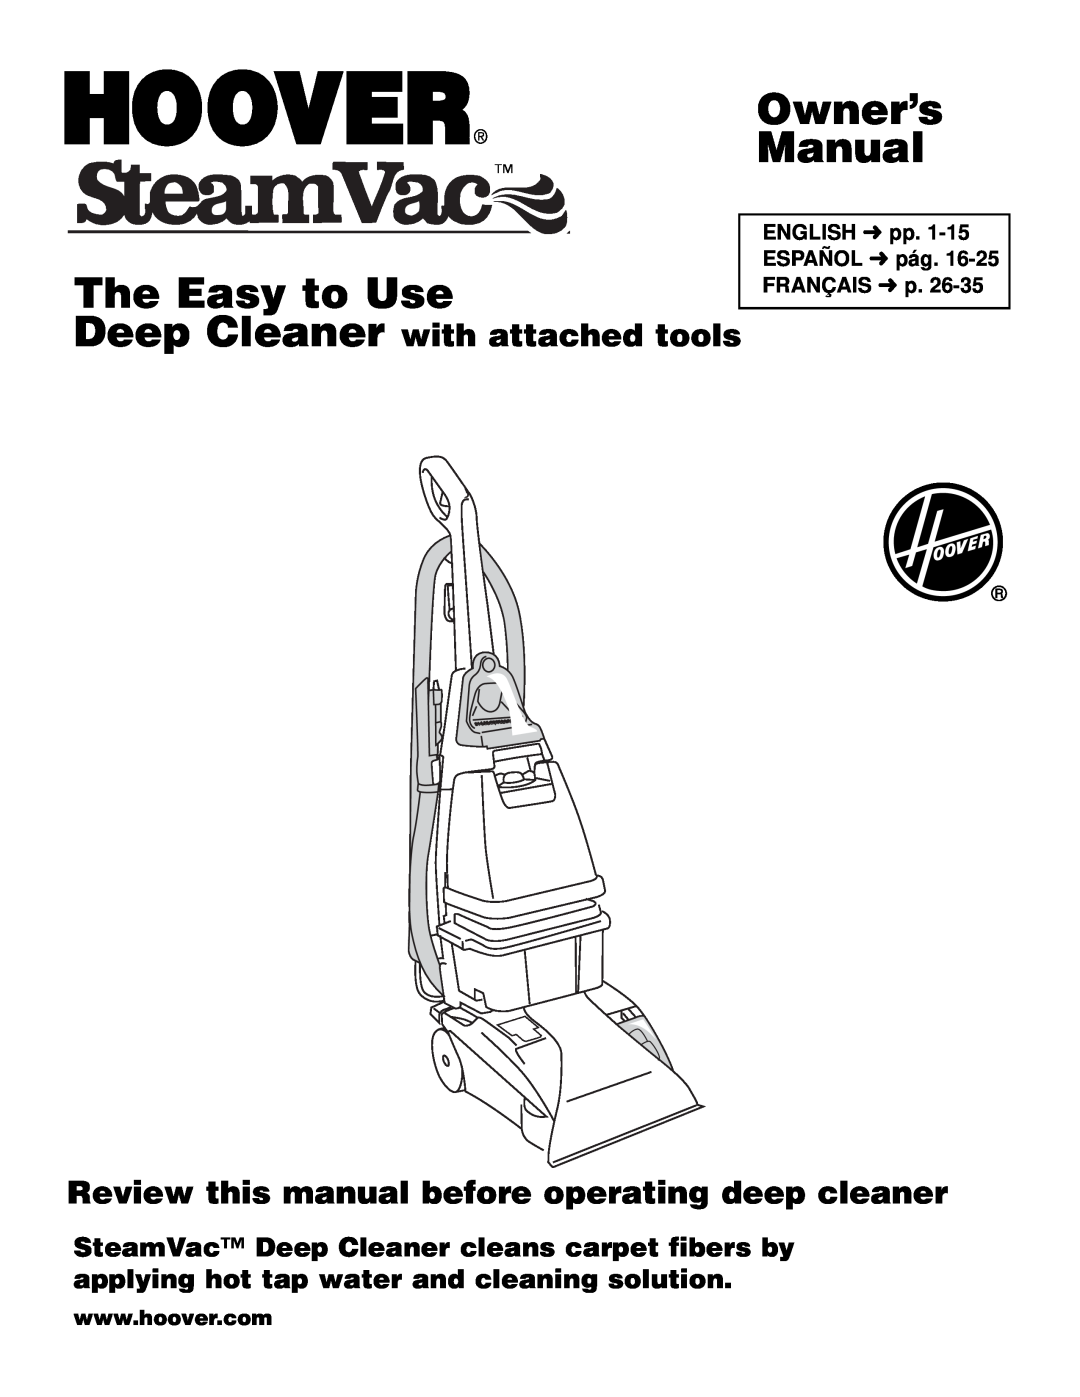 Hoover F5906900 owner manual The Easy to Use, Deep Cleaner with attached tools 